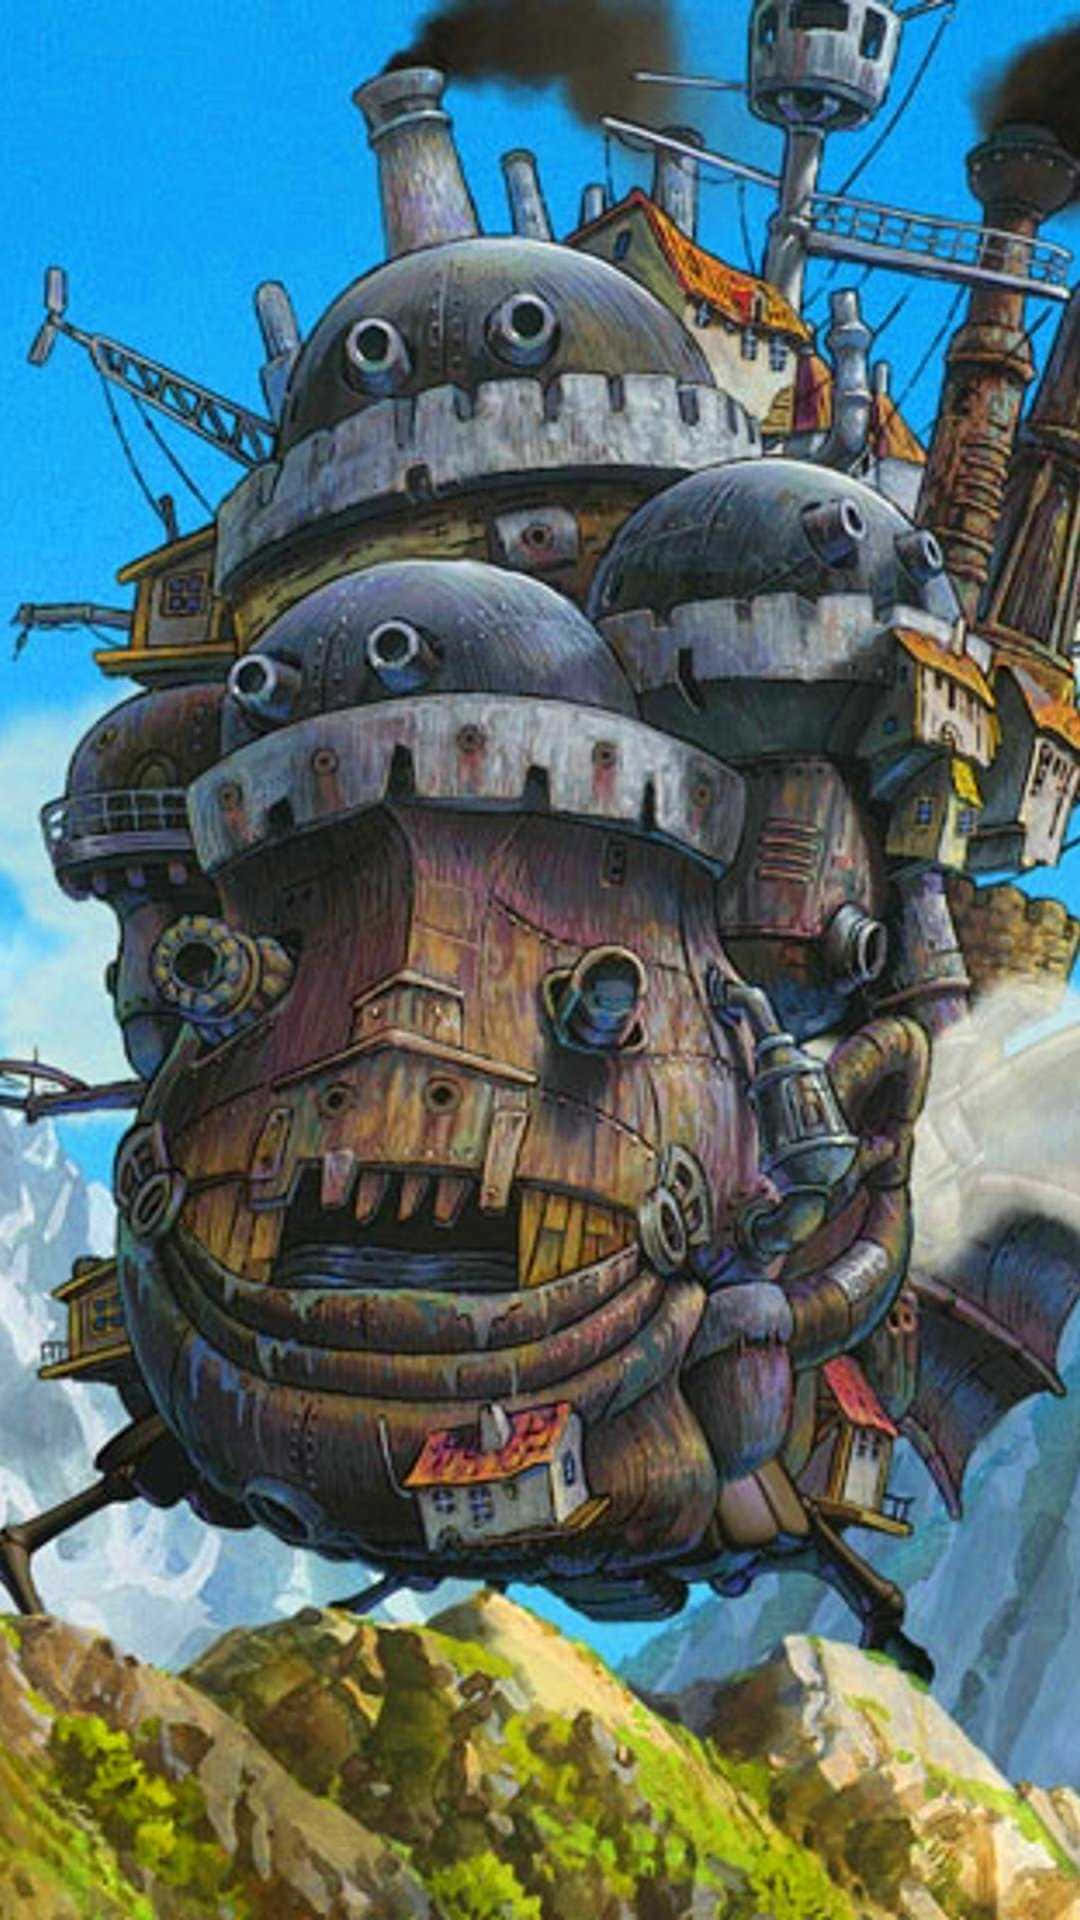 Bring The Magic Of Studio Ghibli Home With The New Phone Wallpaper